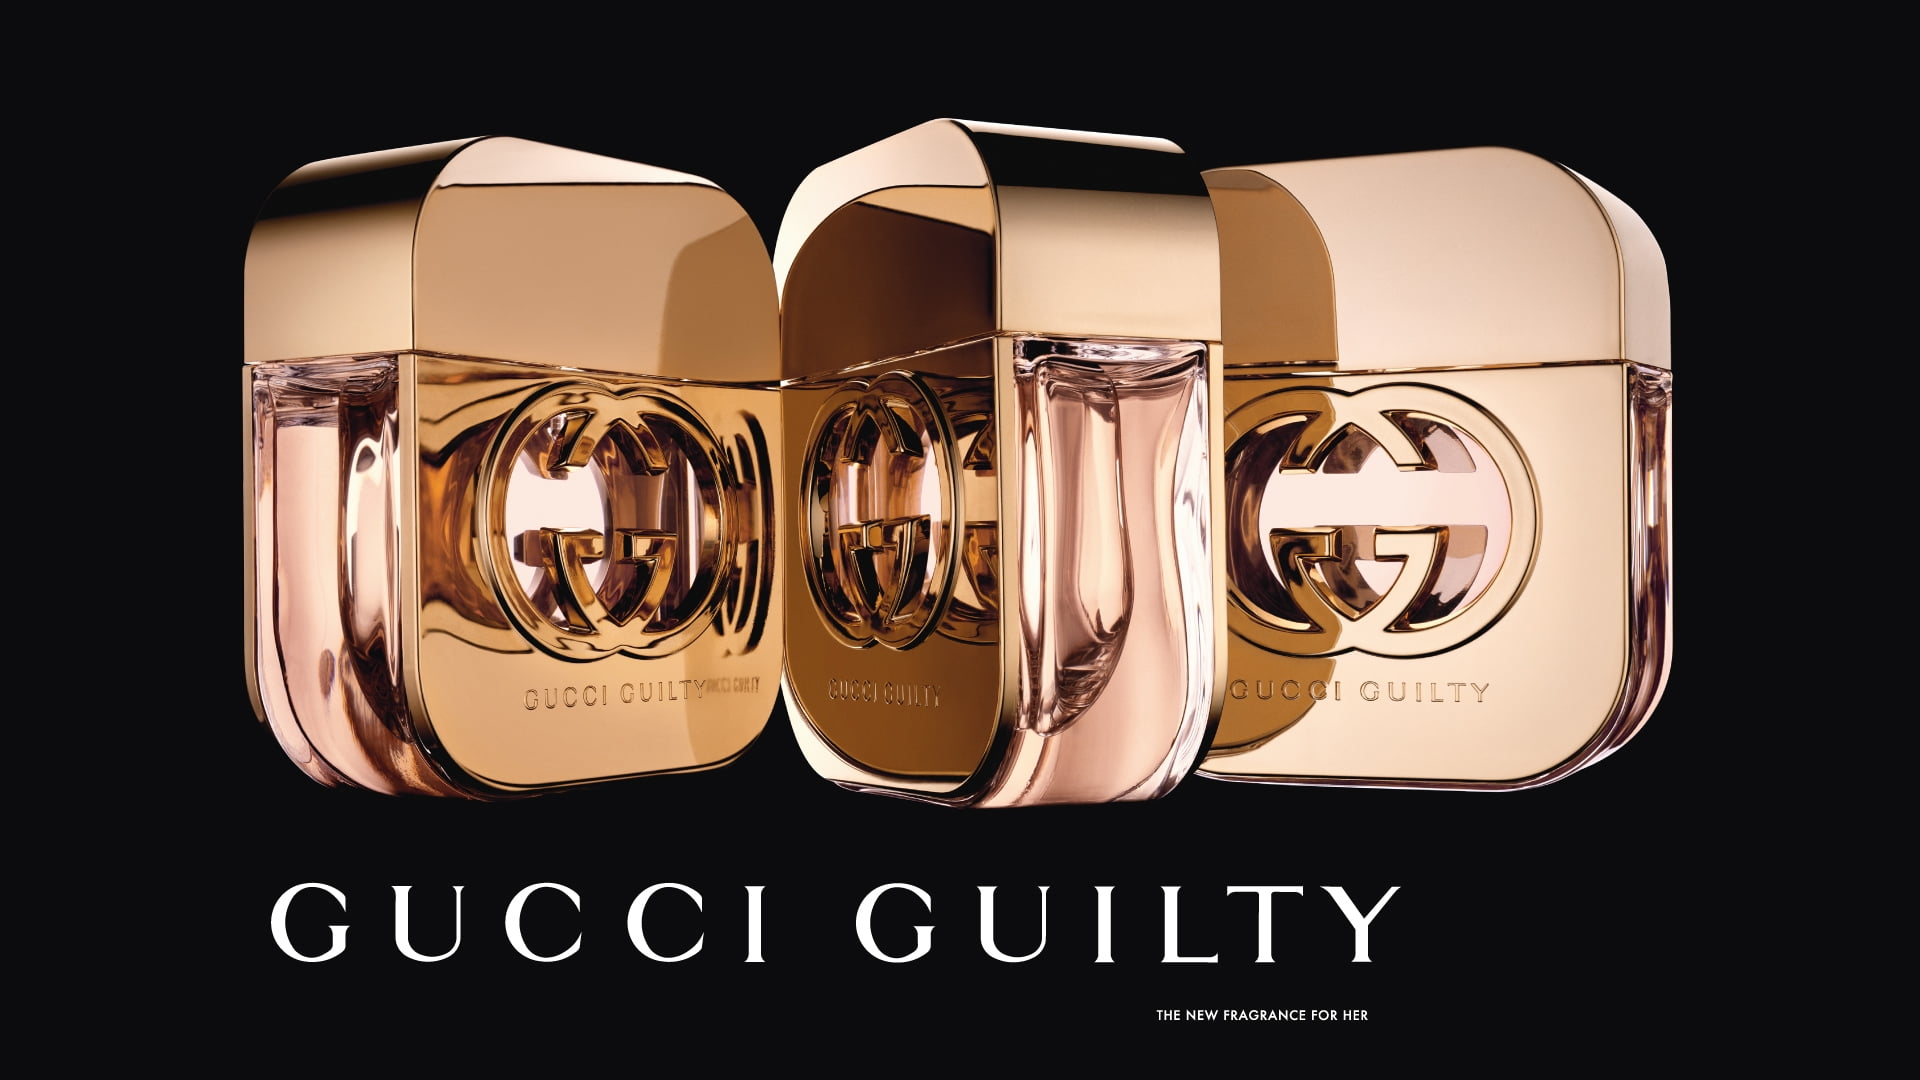 1920x1080 resolution | three Gucci Guilty fragrance bottles HD ...